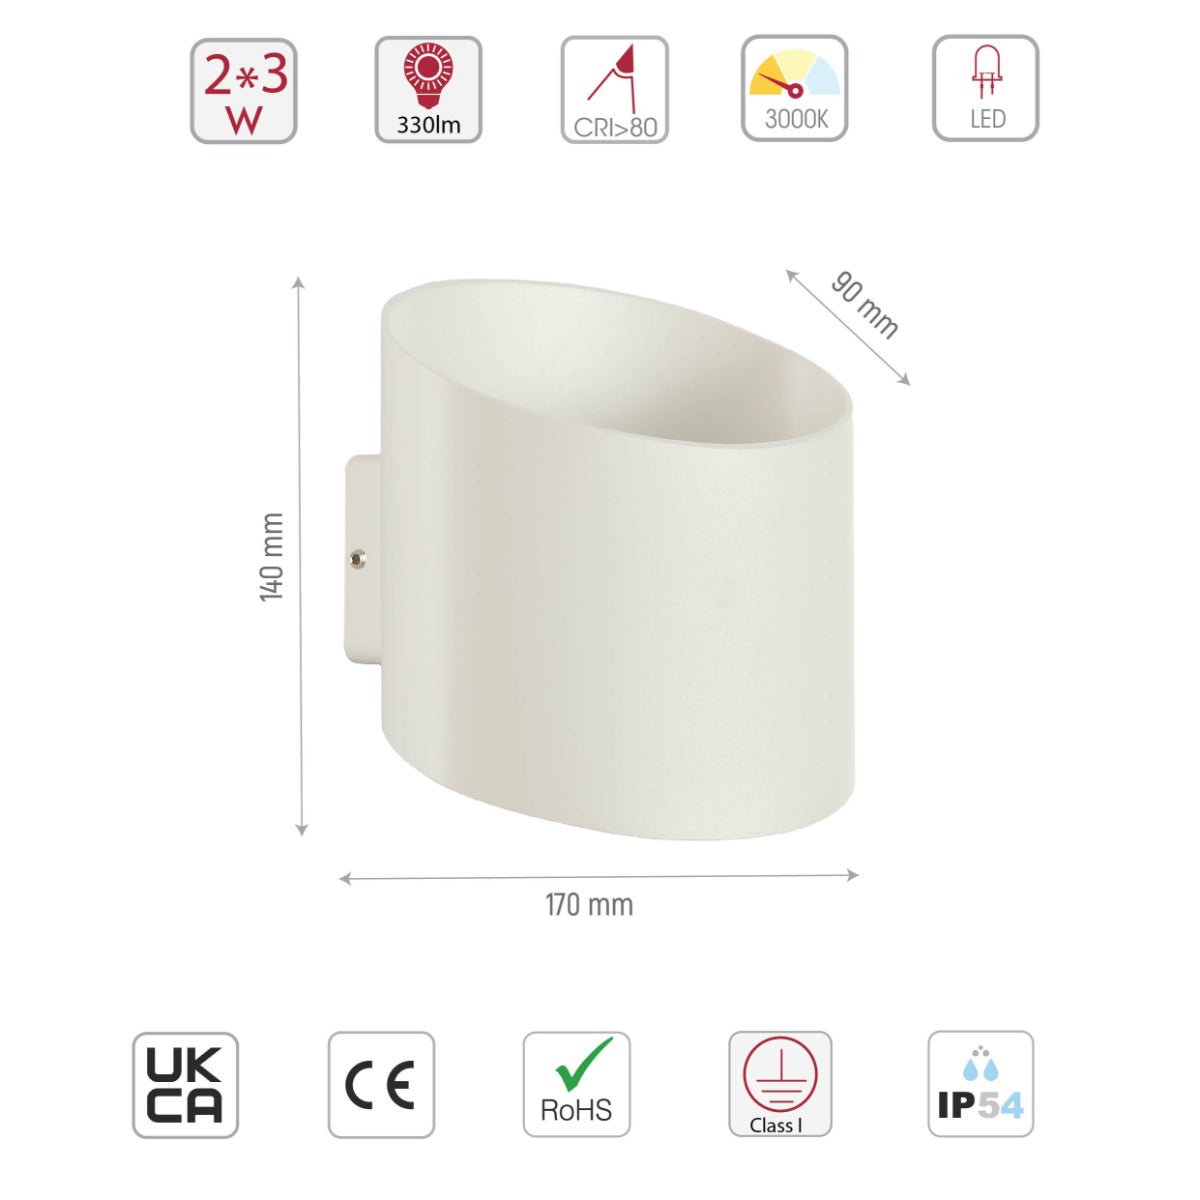 Size and specs of White Oblique Cylinder Up Down Outdoor Modern LED Wall Light | TEKLED 182-03382